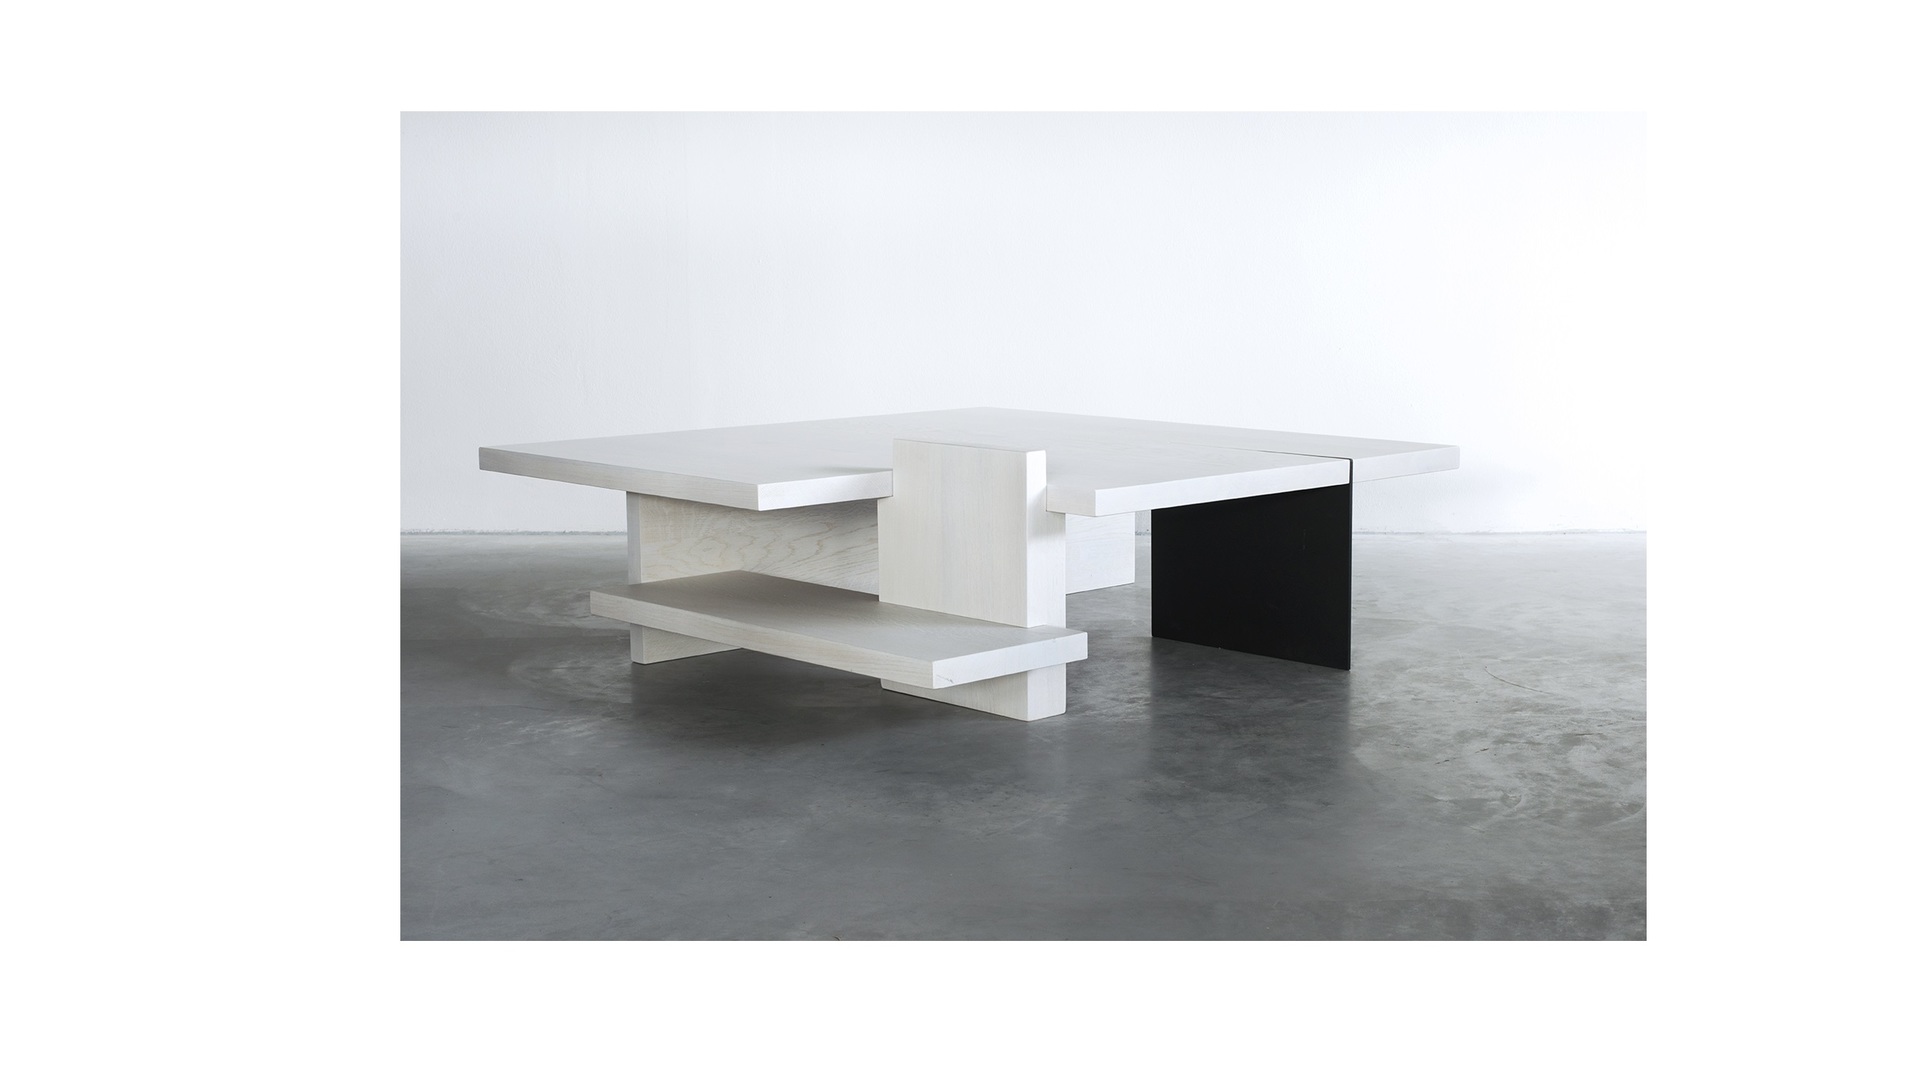 Stijl square coffee table with epoxy steel (1) klein.jpg